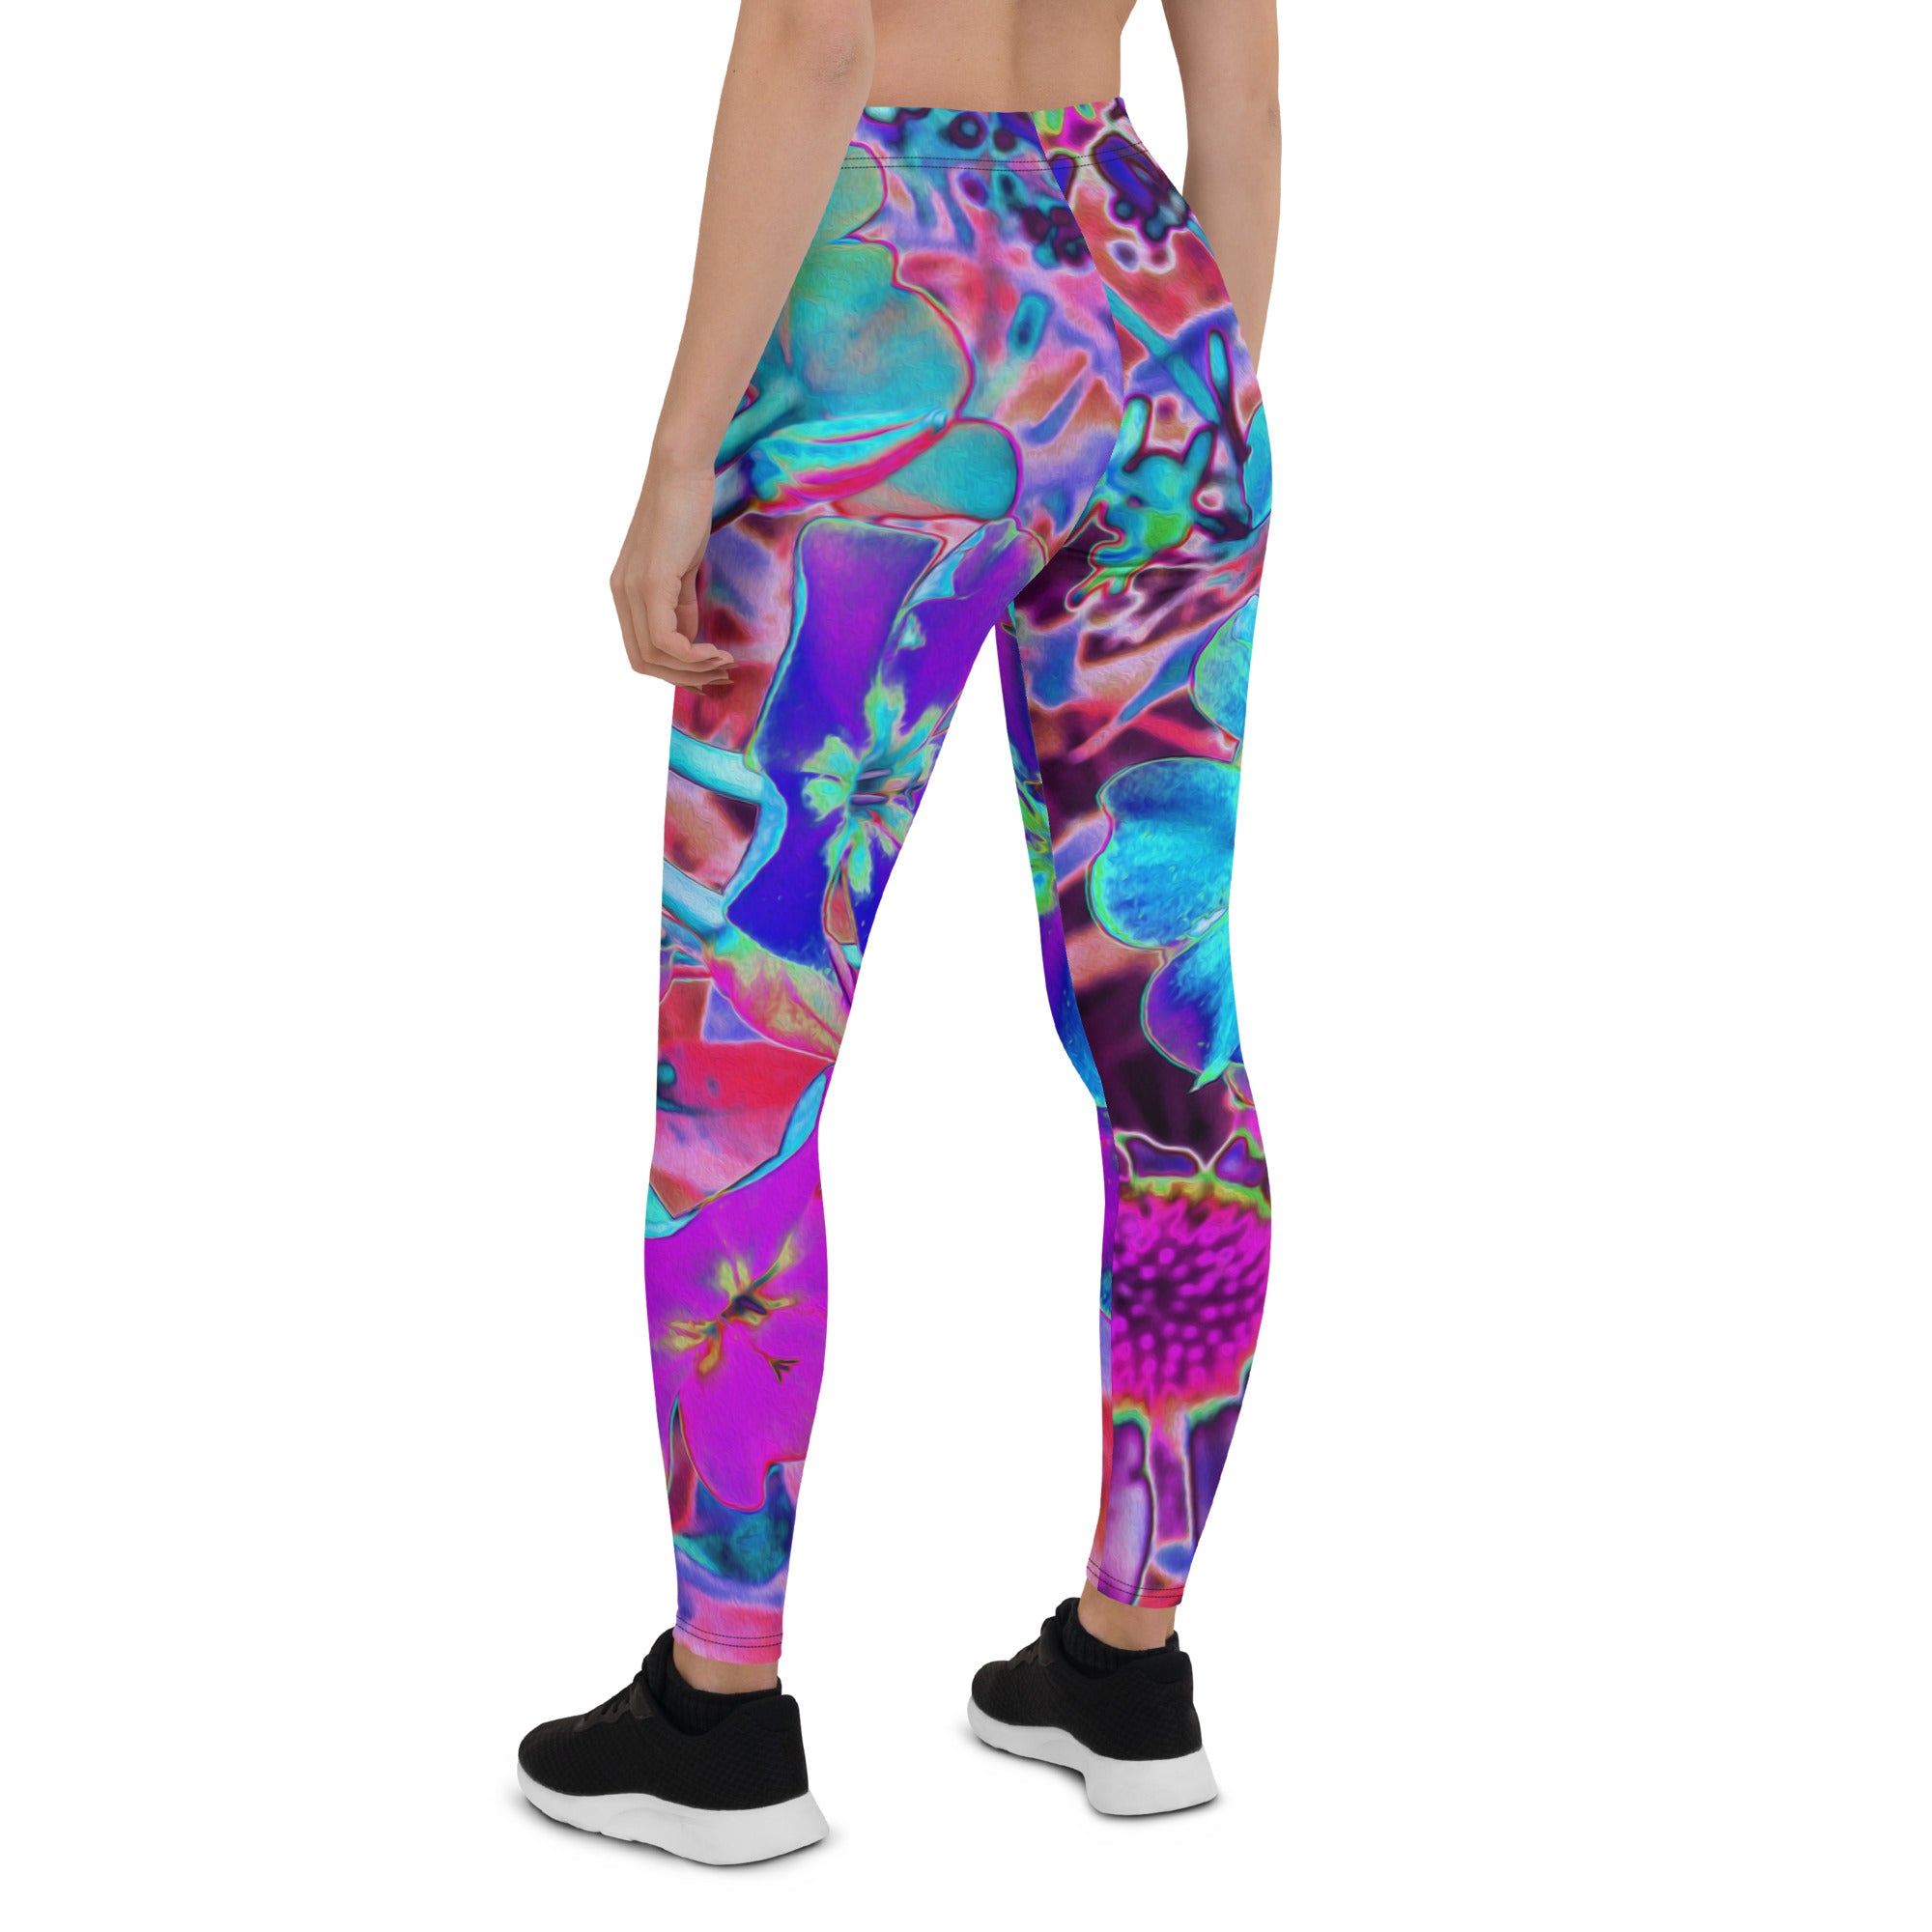 Leggings for Women - Blooming Abstract Purple and Blue Flower